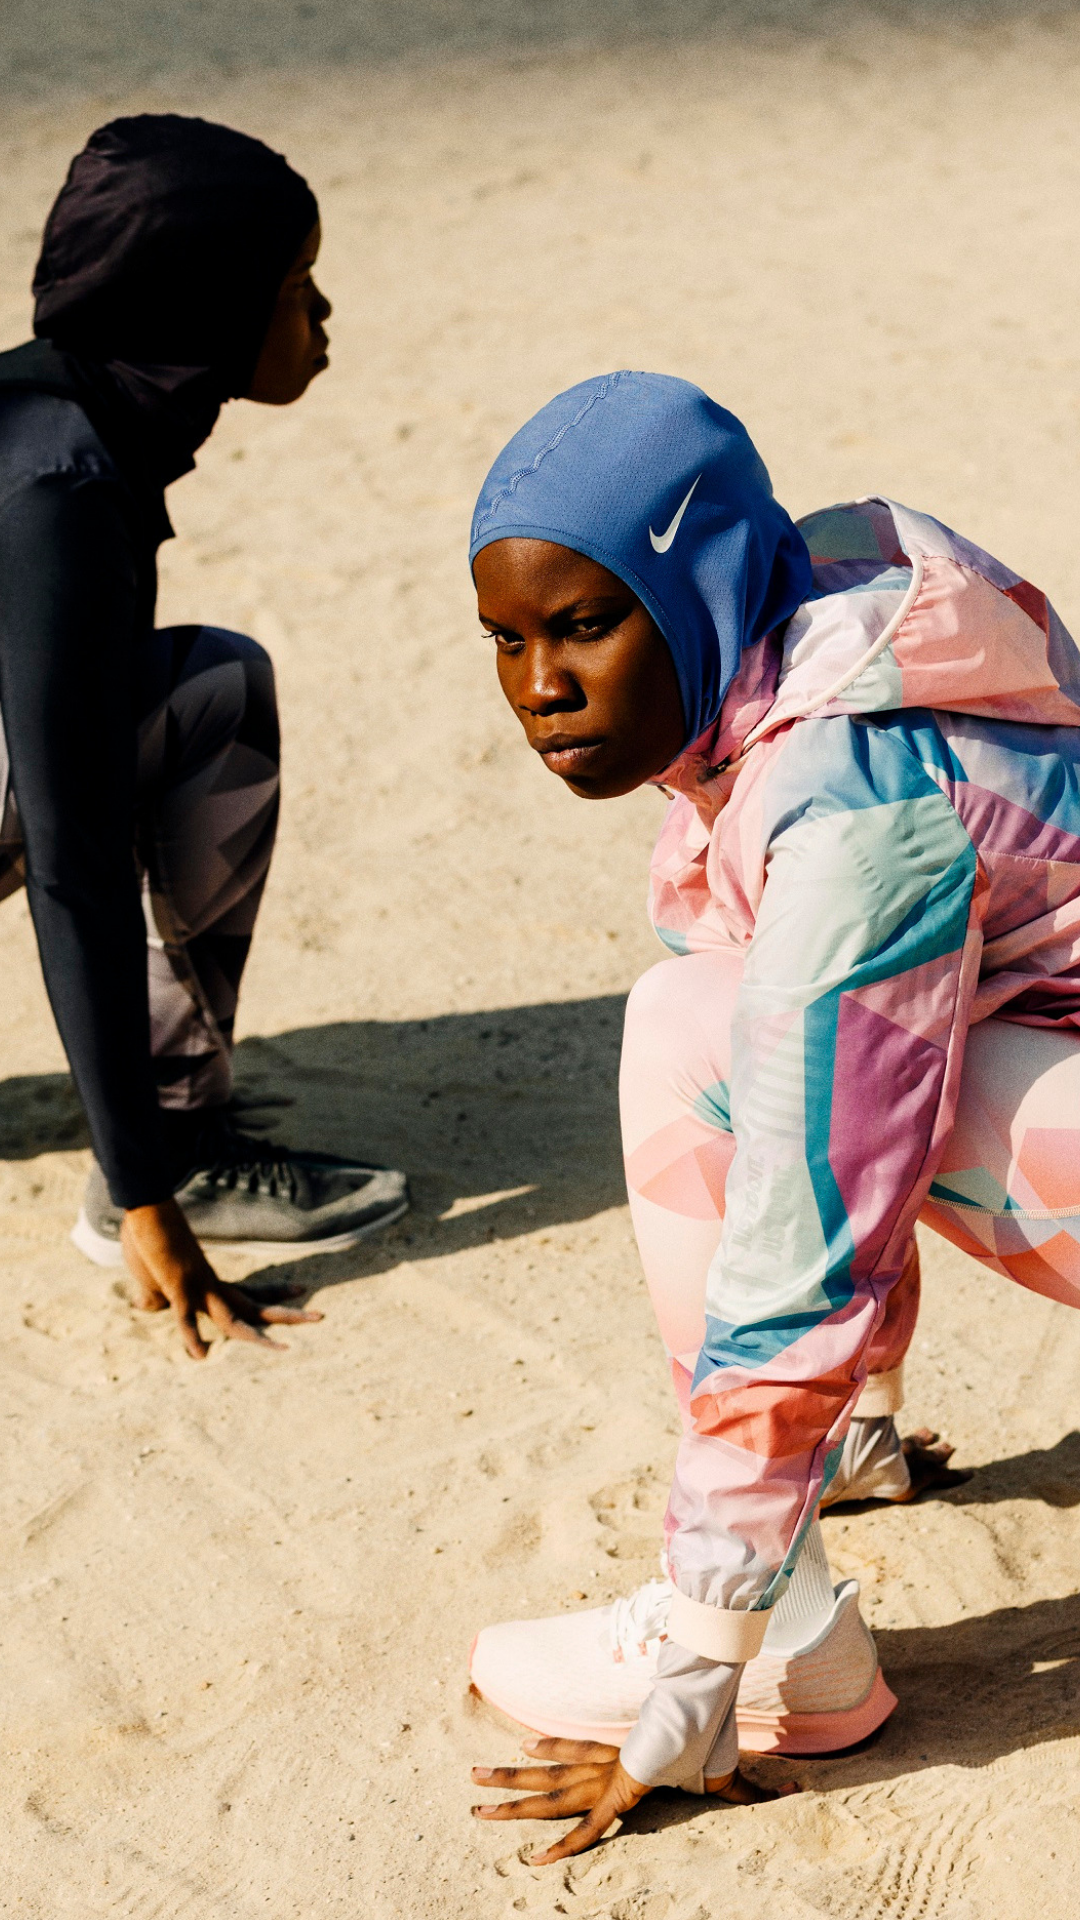 Nike Middle East's Latest Campaign Calls Dubai's Young Emerging Athletes To Rep Their City | Harper's Bazaar Arabia